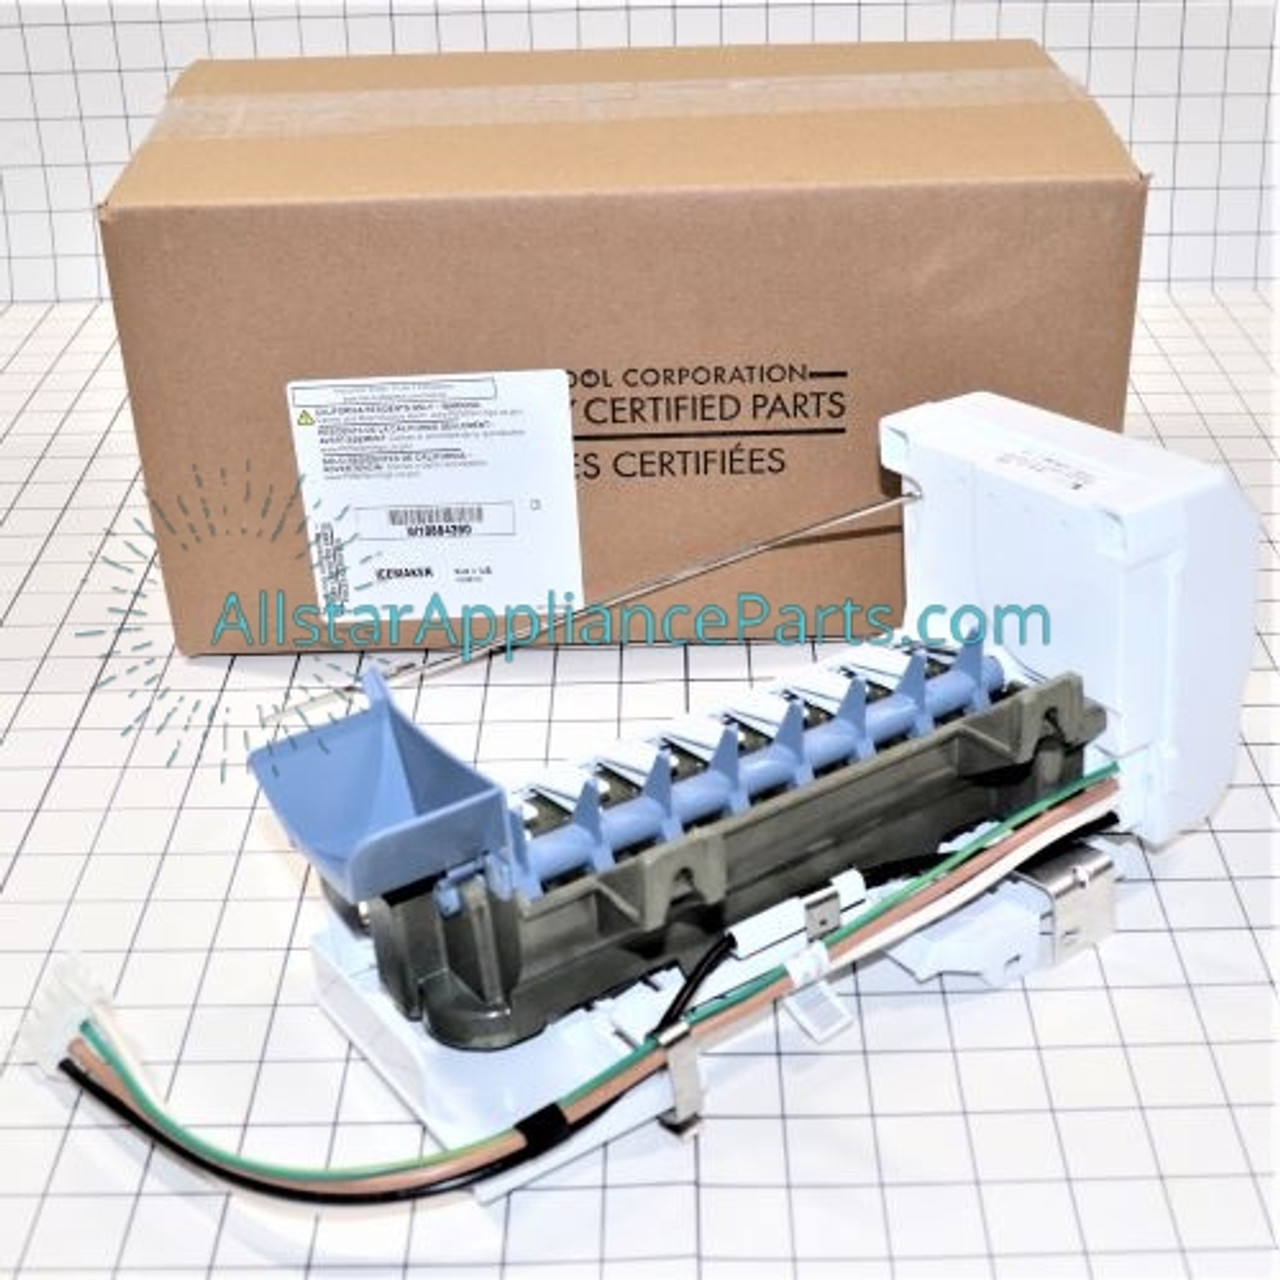 Refrigerator Icemaker for W10884390 Whirlpool Maytag